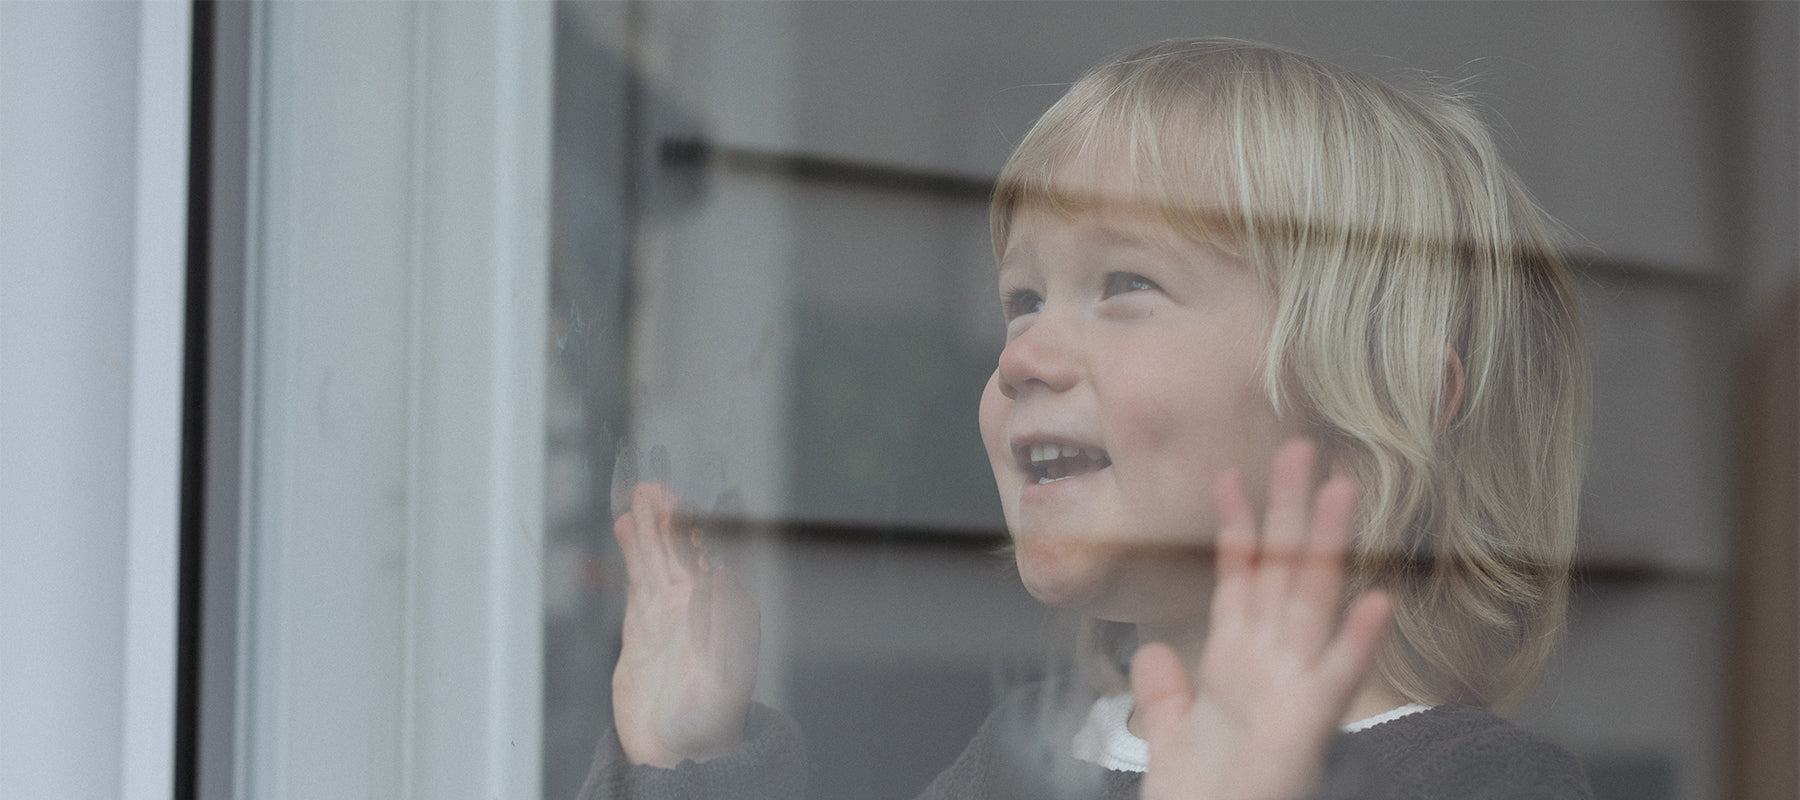 photo of young boy looking through the window with his hands on the glass smiling